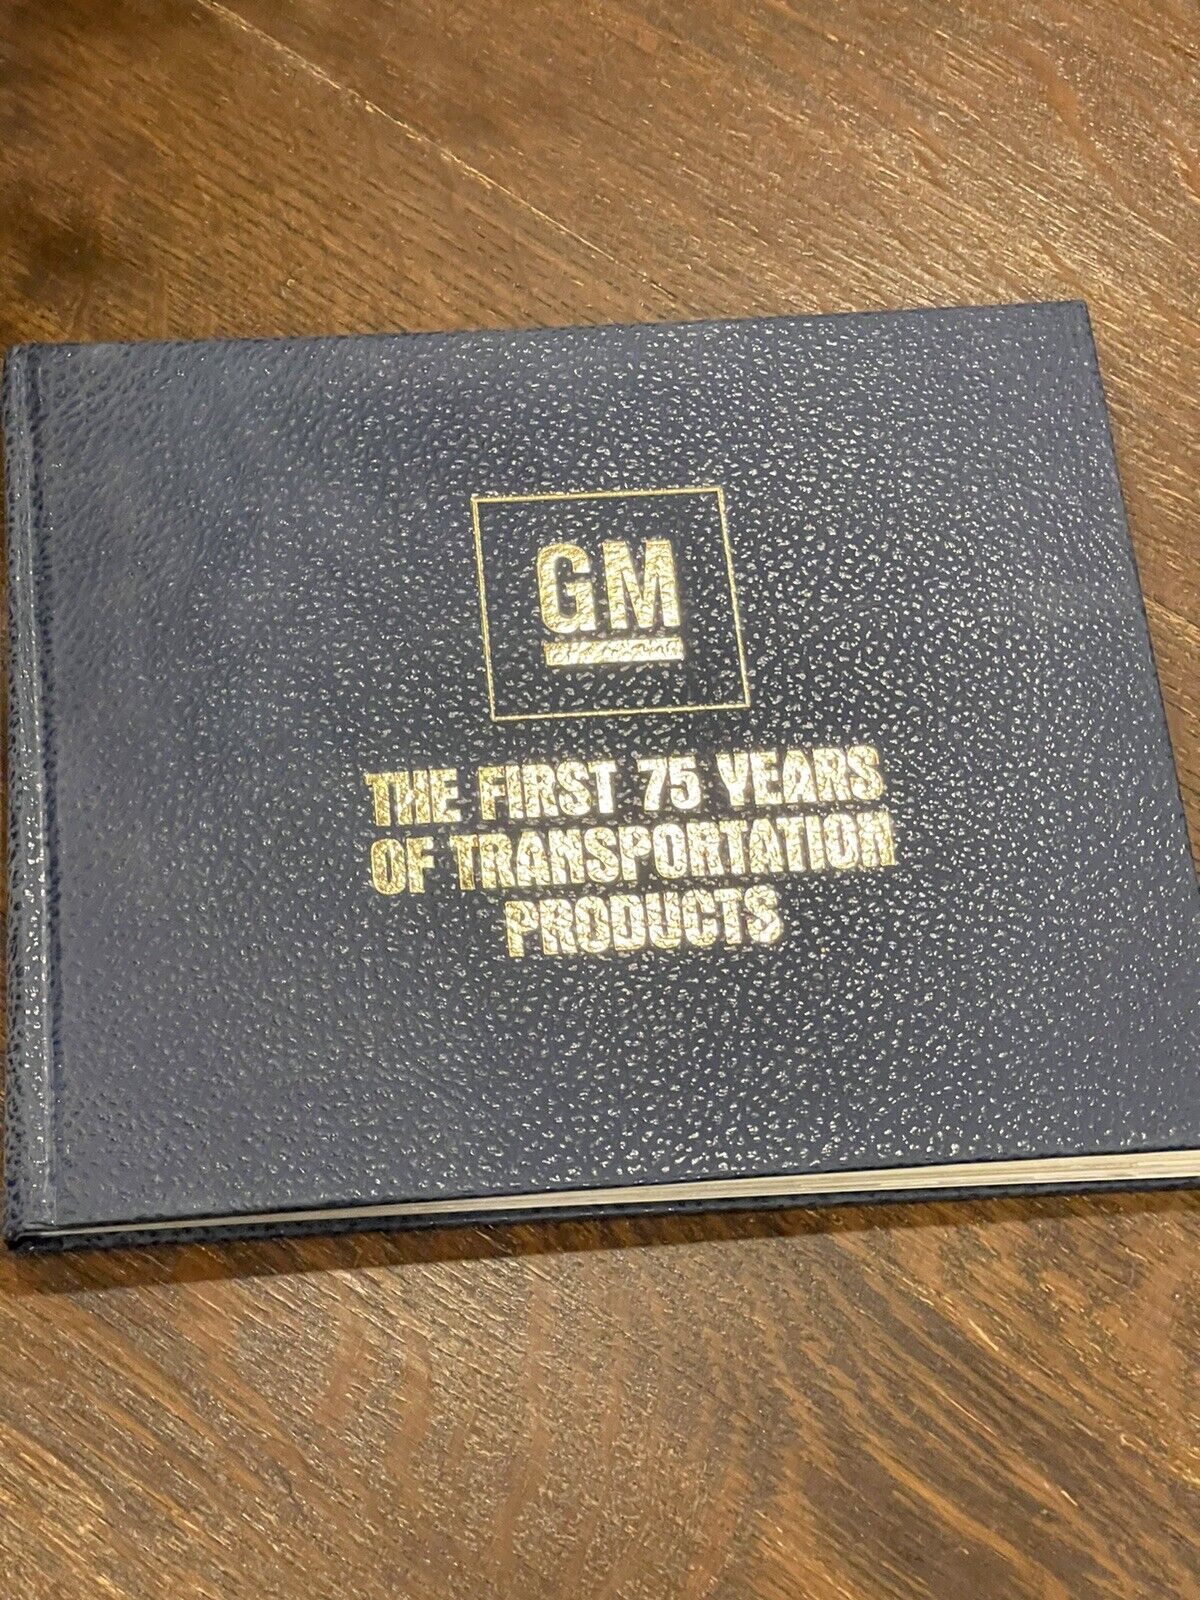 GM THE FIRST 75 YEARS OF TRANSPORTATION PRODUCTS BOOK HARDCOVER 1983 w/letter